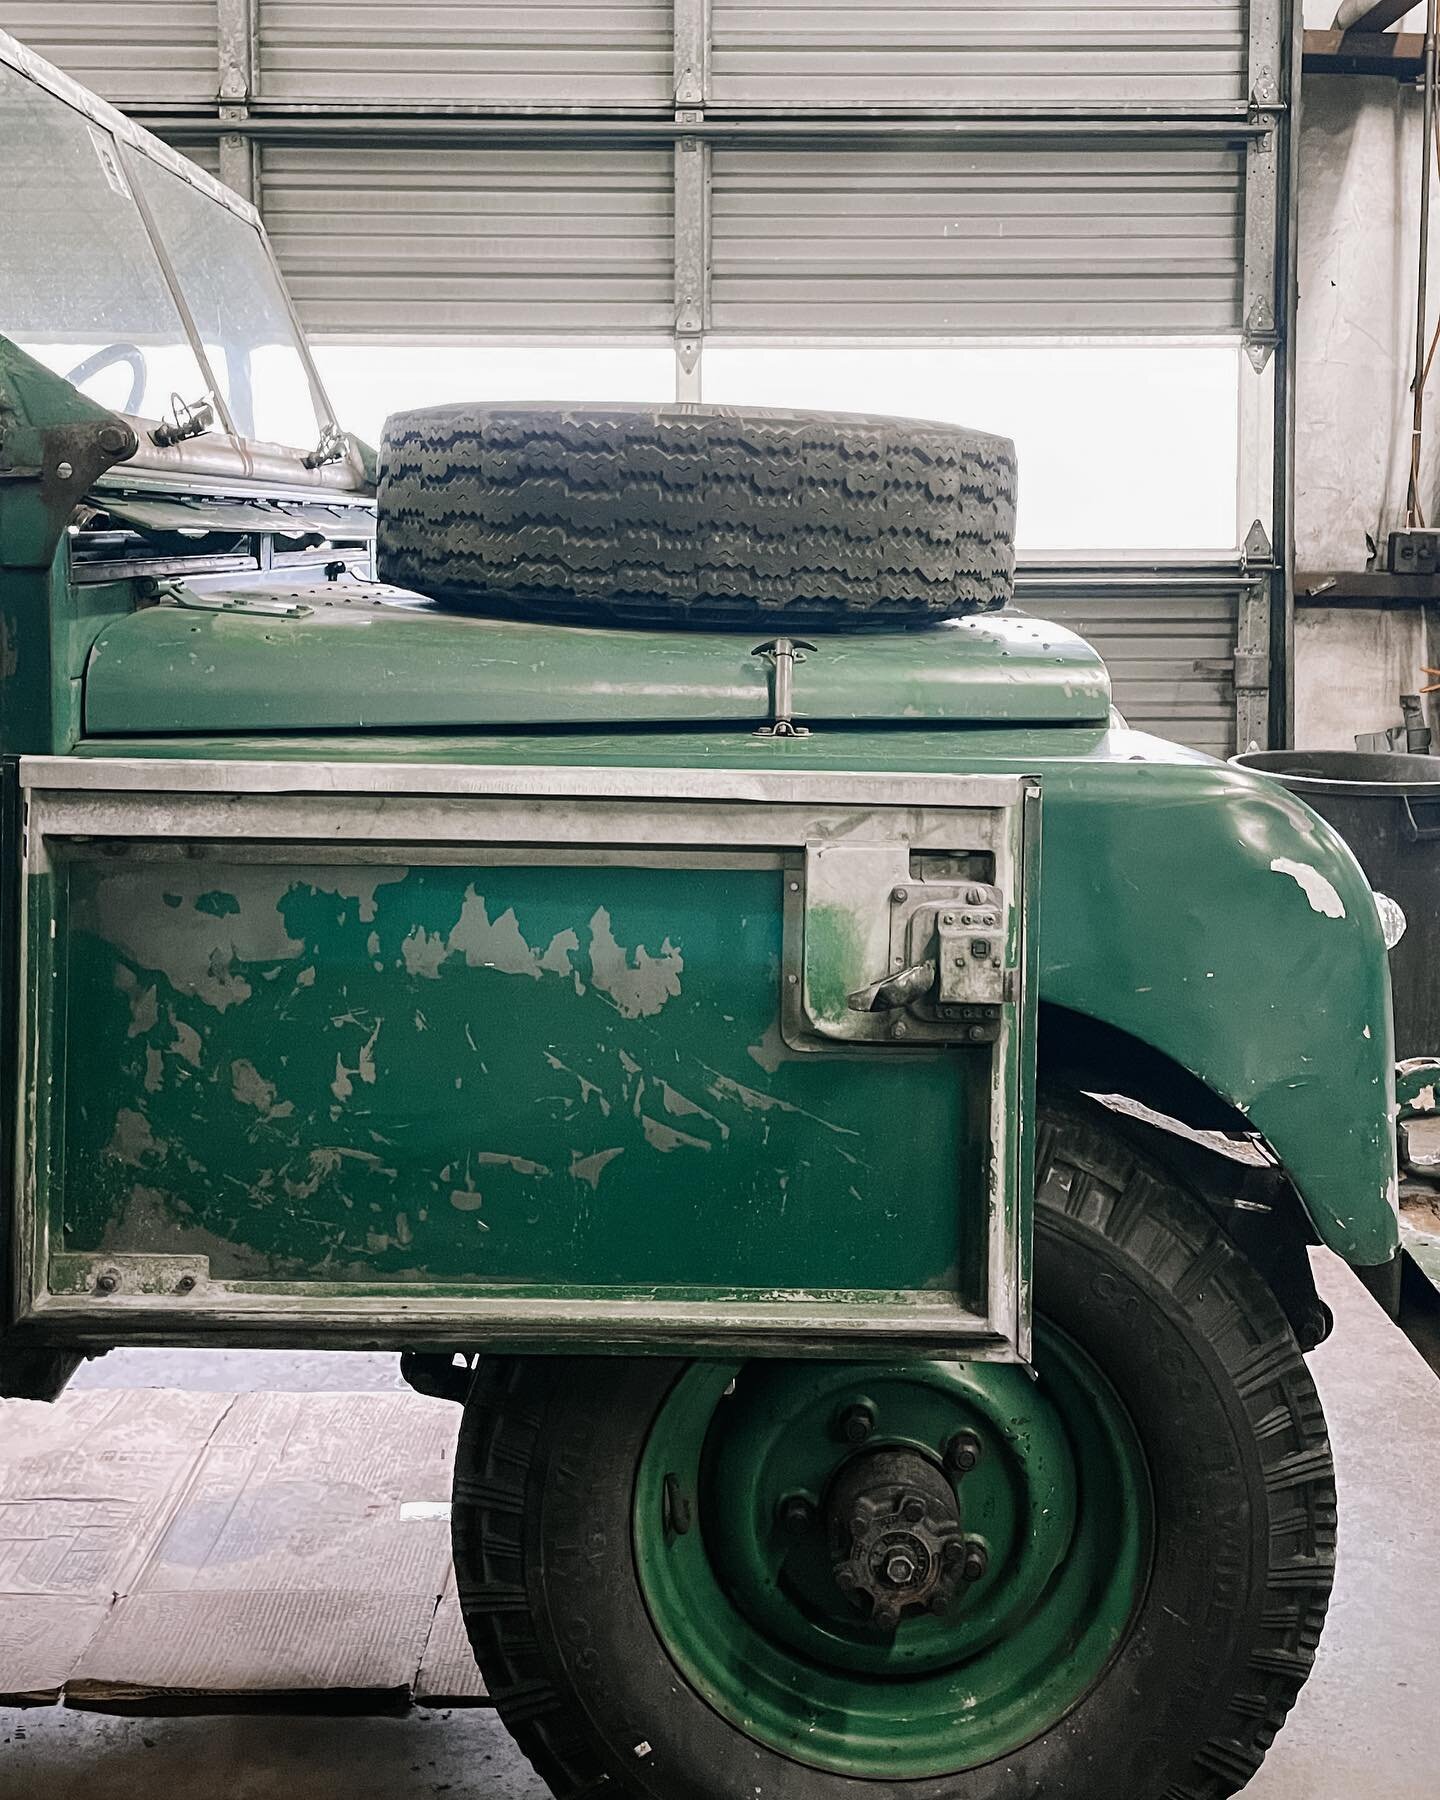 Gramps still has it.
64yrs and steady rocking 🤘

Would you daily a Series around town? If not, what Rover would you prefer? Tell us below👇

#landroverseries #landrover #adventure #camping #getoutside #best4x4xfar 
@roversnorth @roversmag @landrover